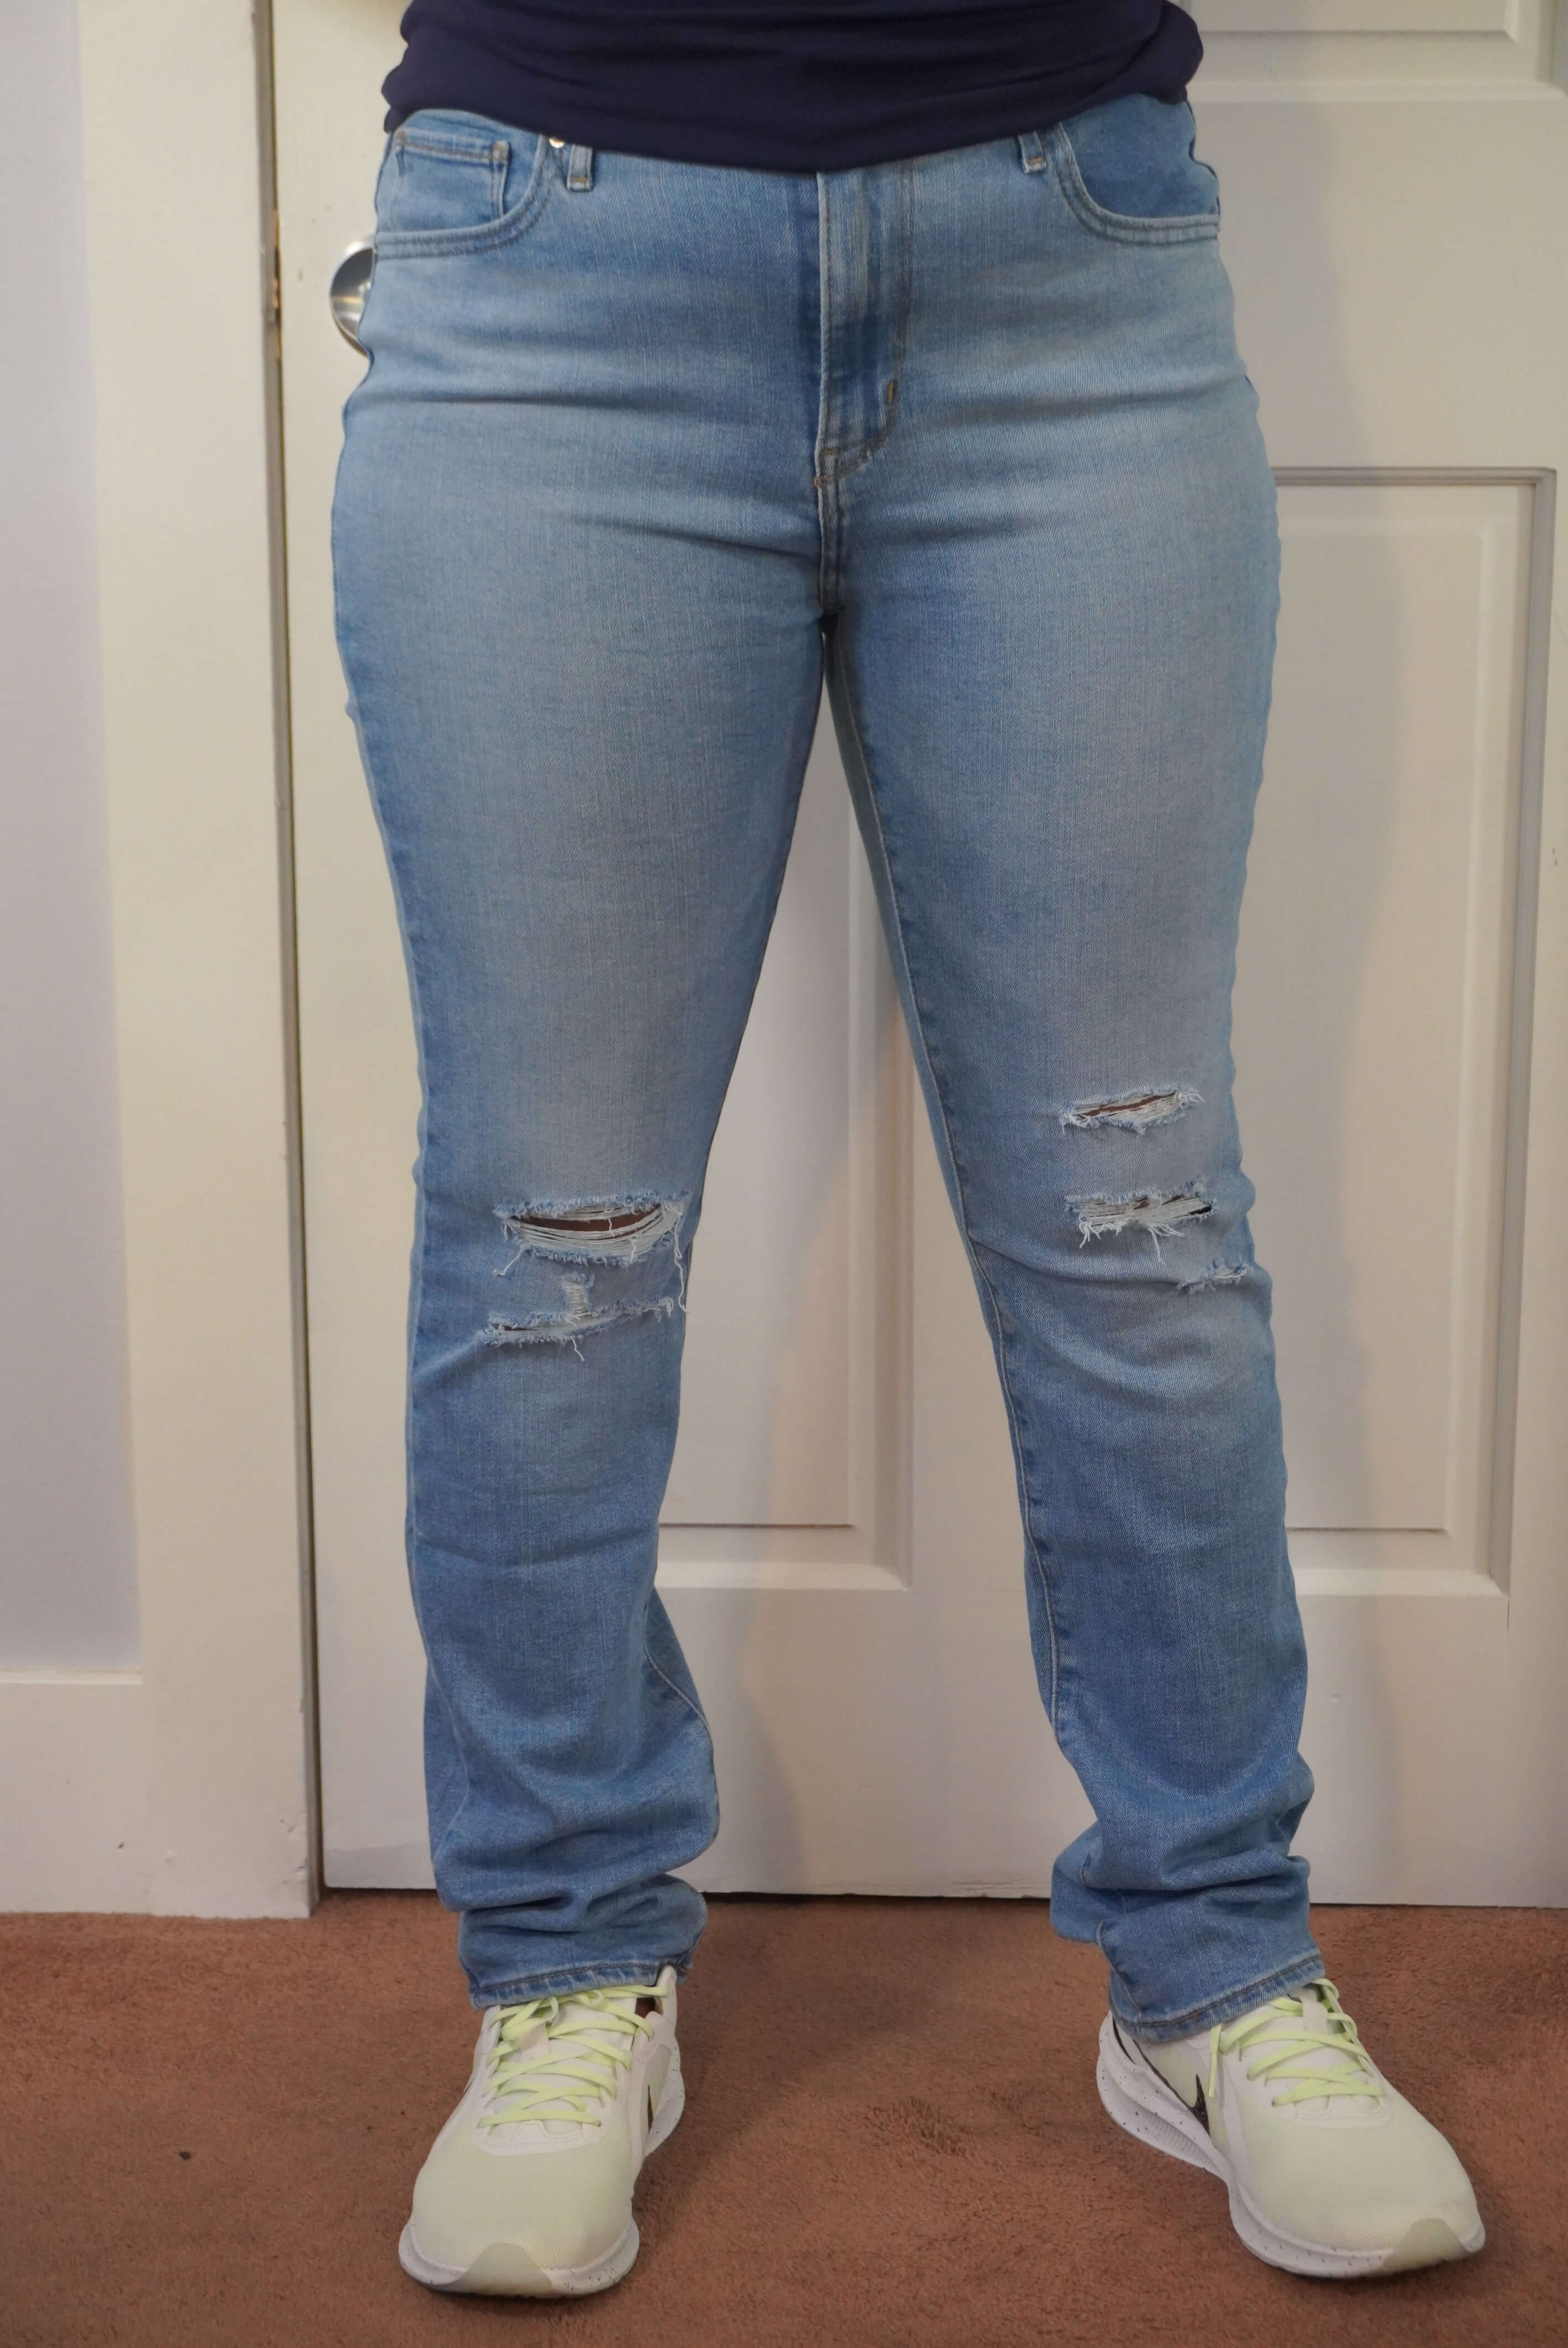 This image shows a front view of the Levi's 724 jeans in a light blue stone wash. The jeans are distressed at the knee area.